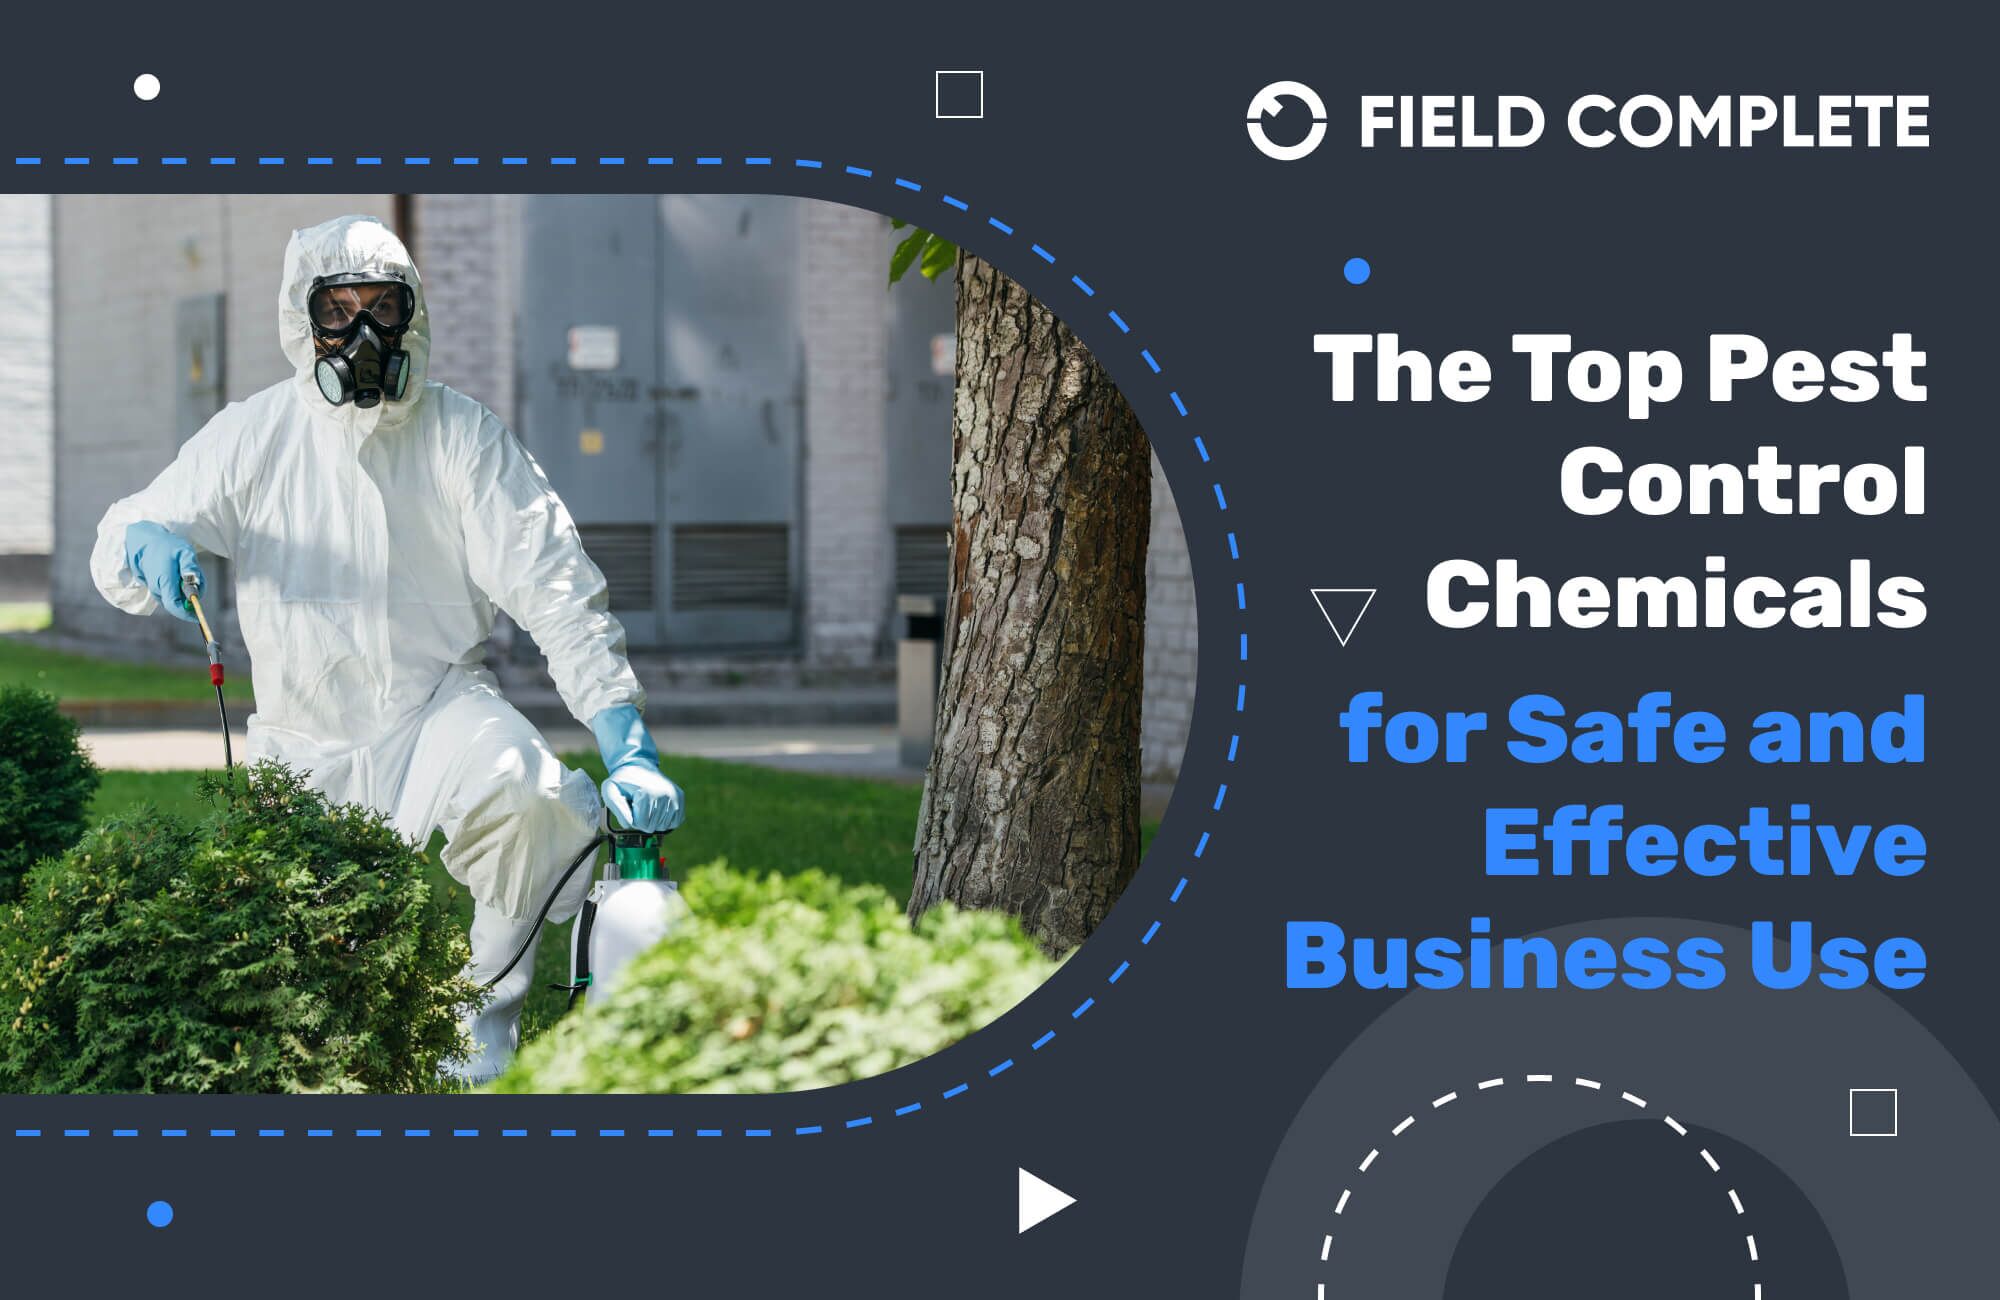 The Top Pest Control Chemicals for Safe and Effective Business Use